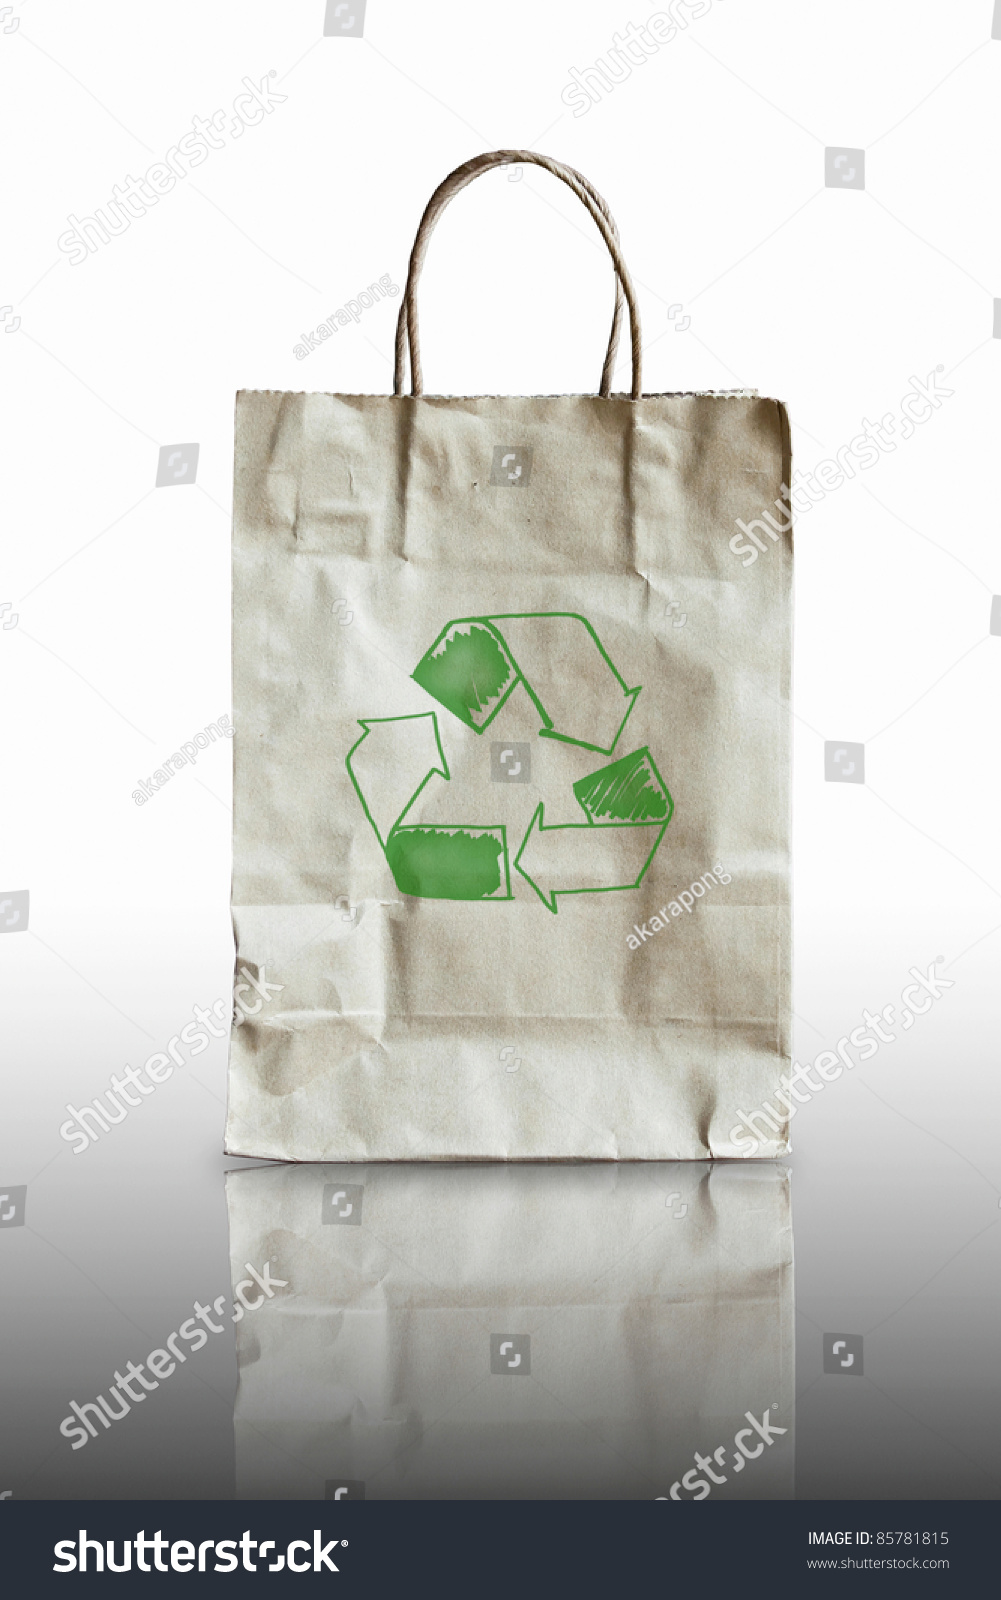 Paper Bag With Recycle Logo Stock Photo 85781815 : Shutterstock